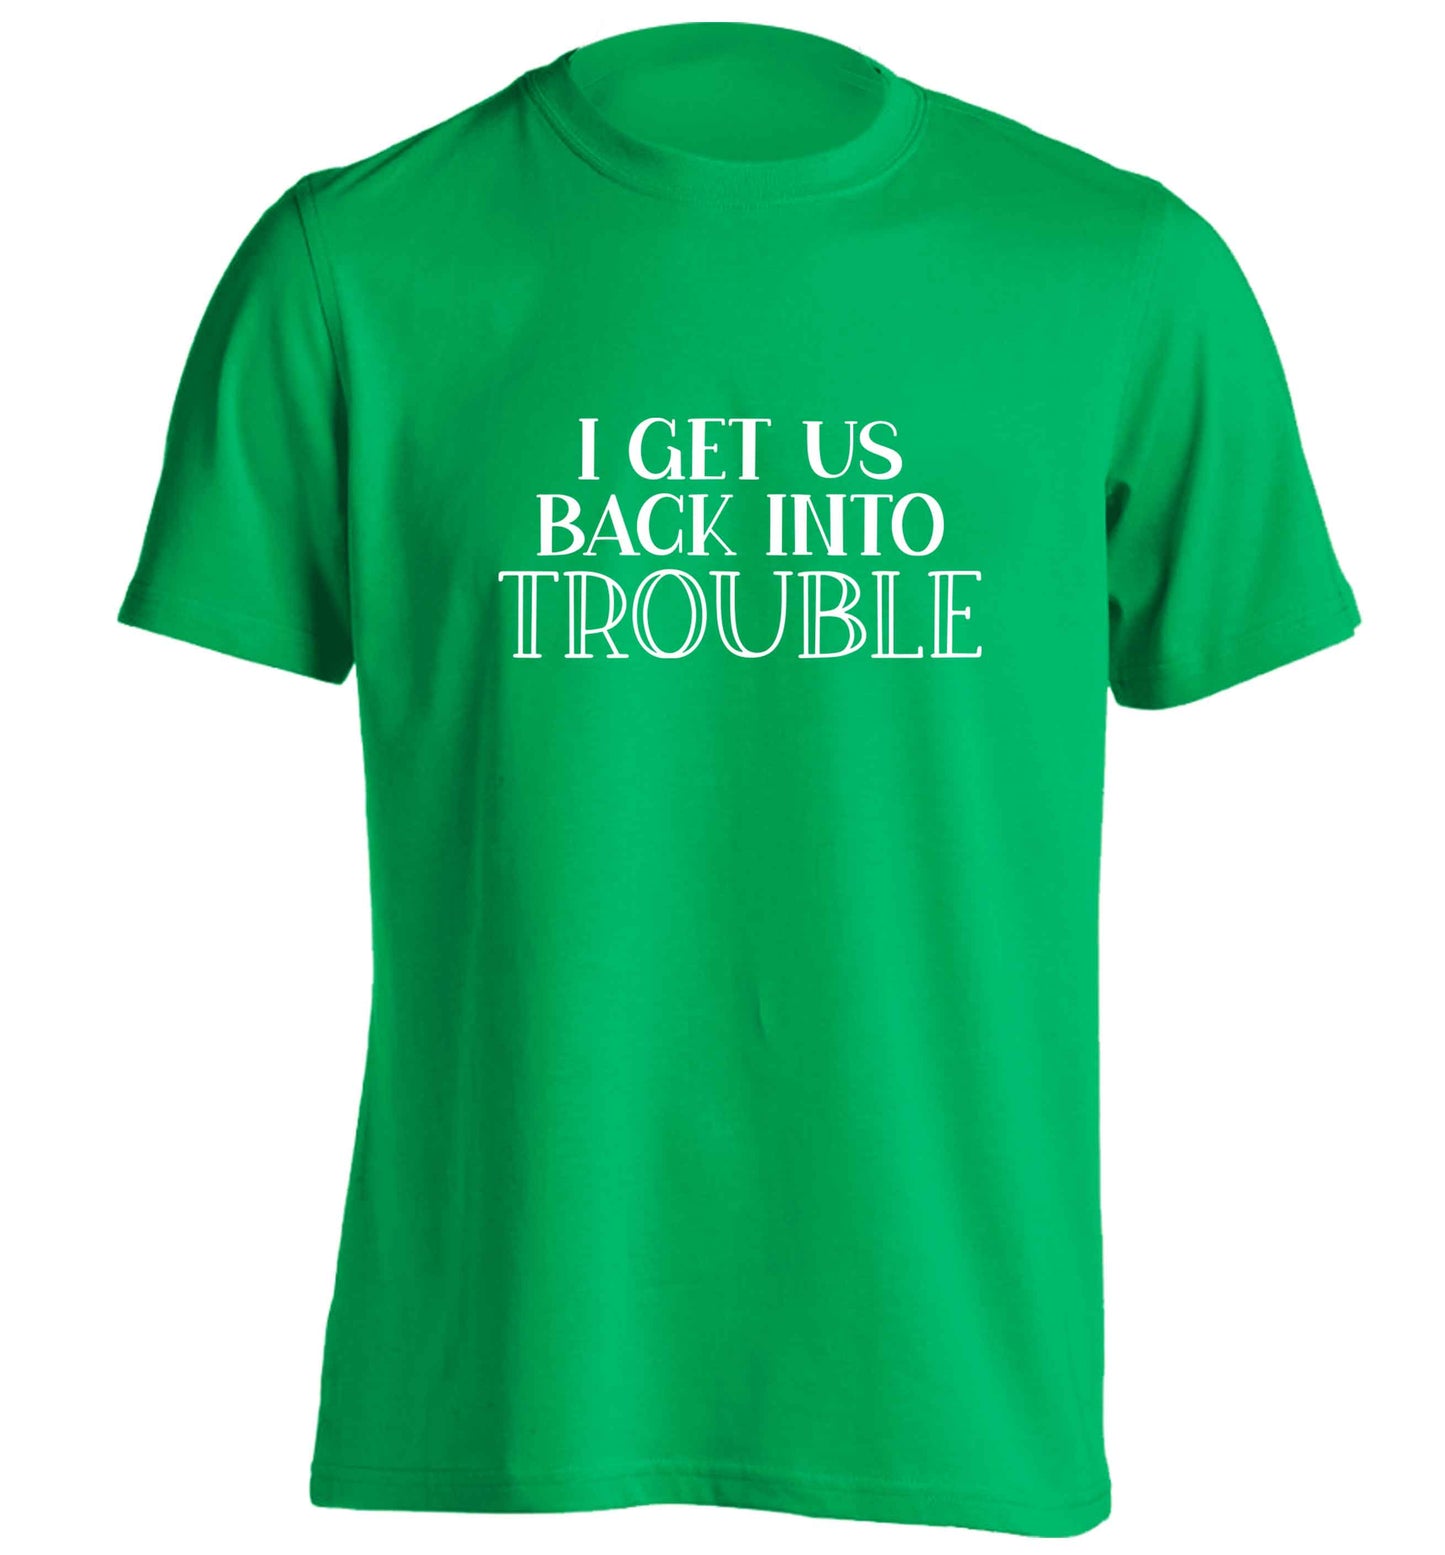 I get us back into trouble adults unisex green Tshirt 2XL